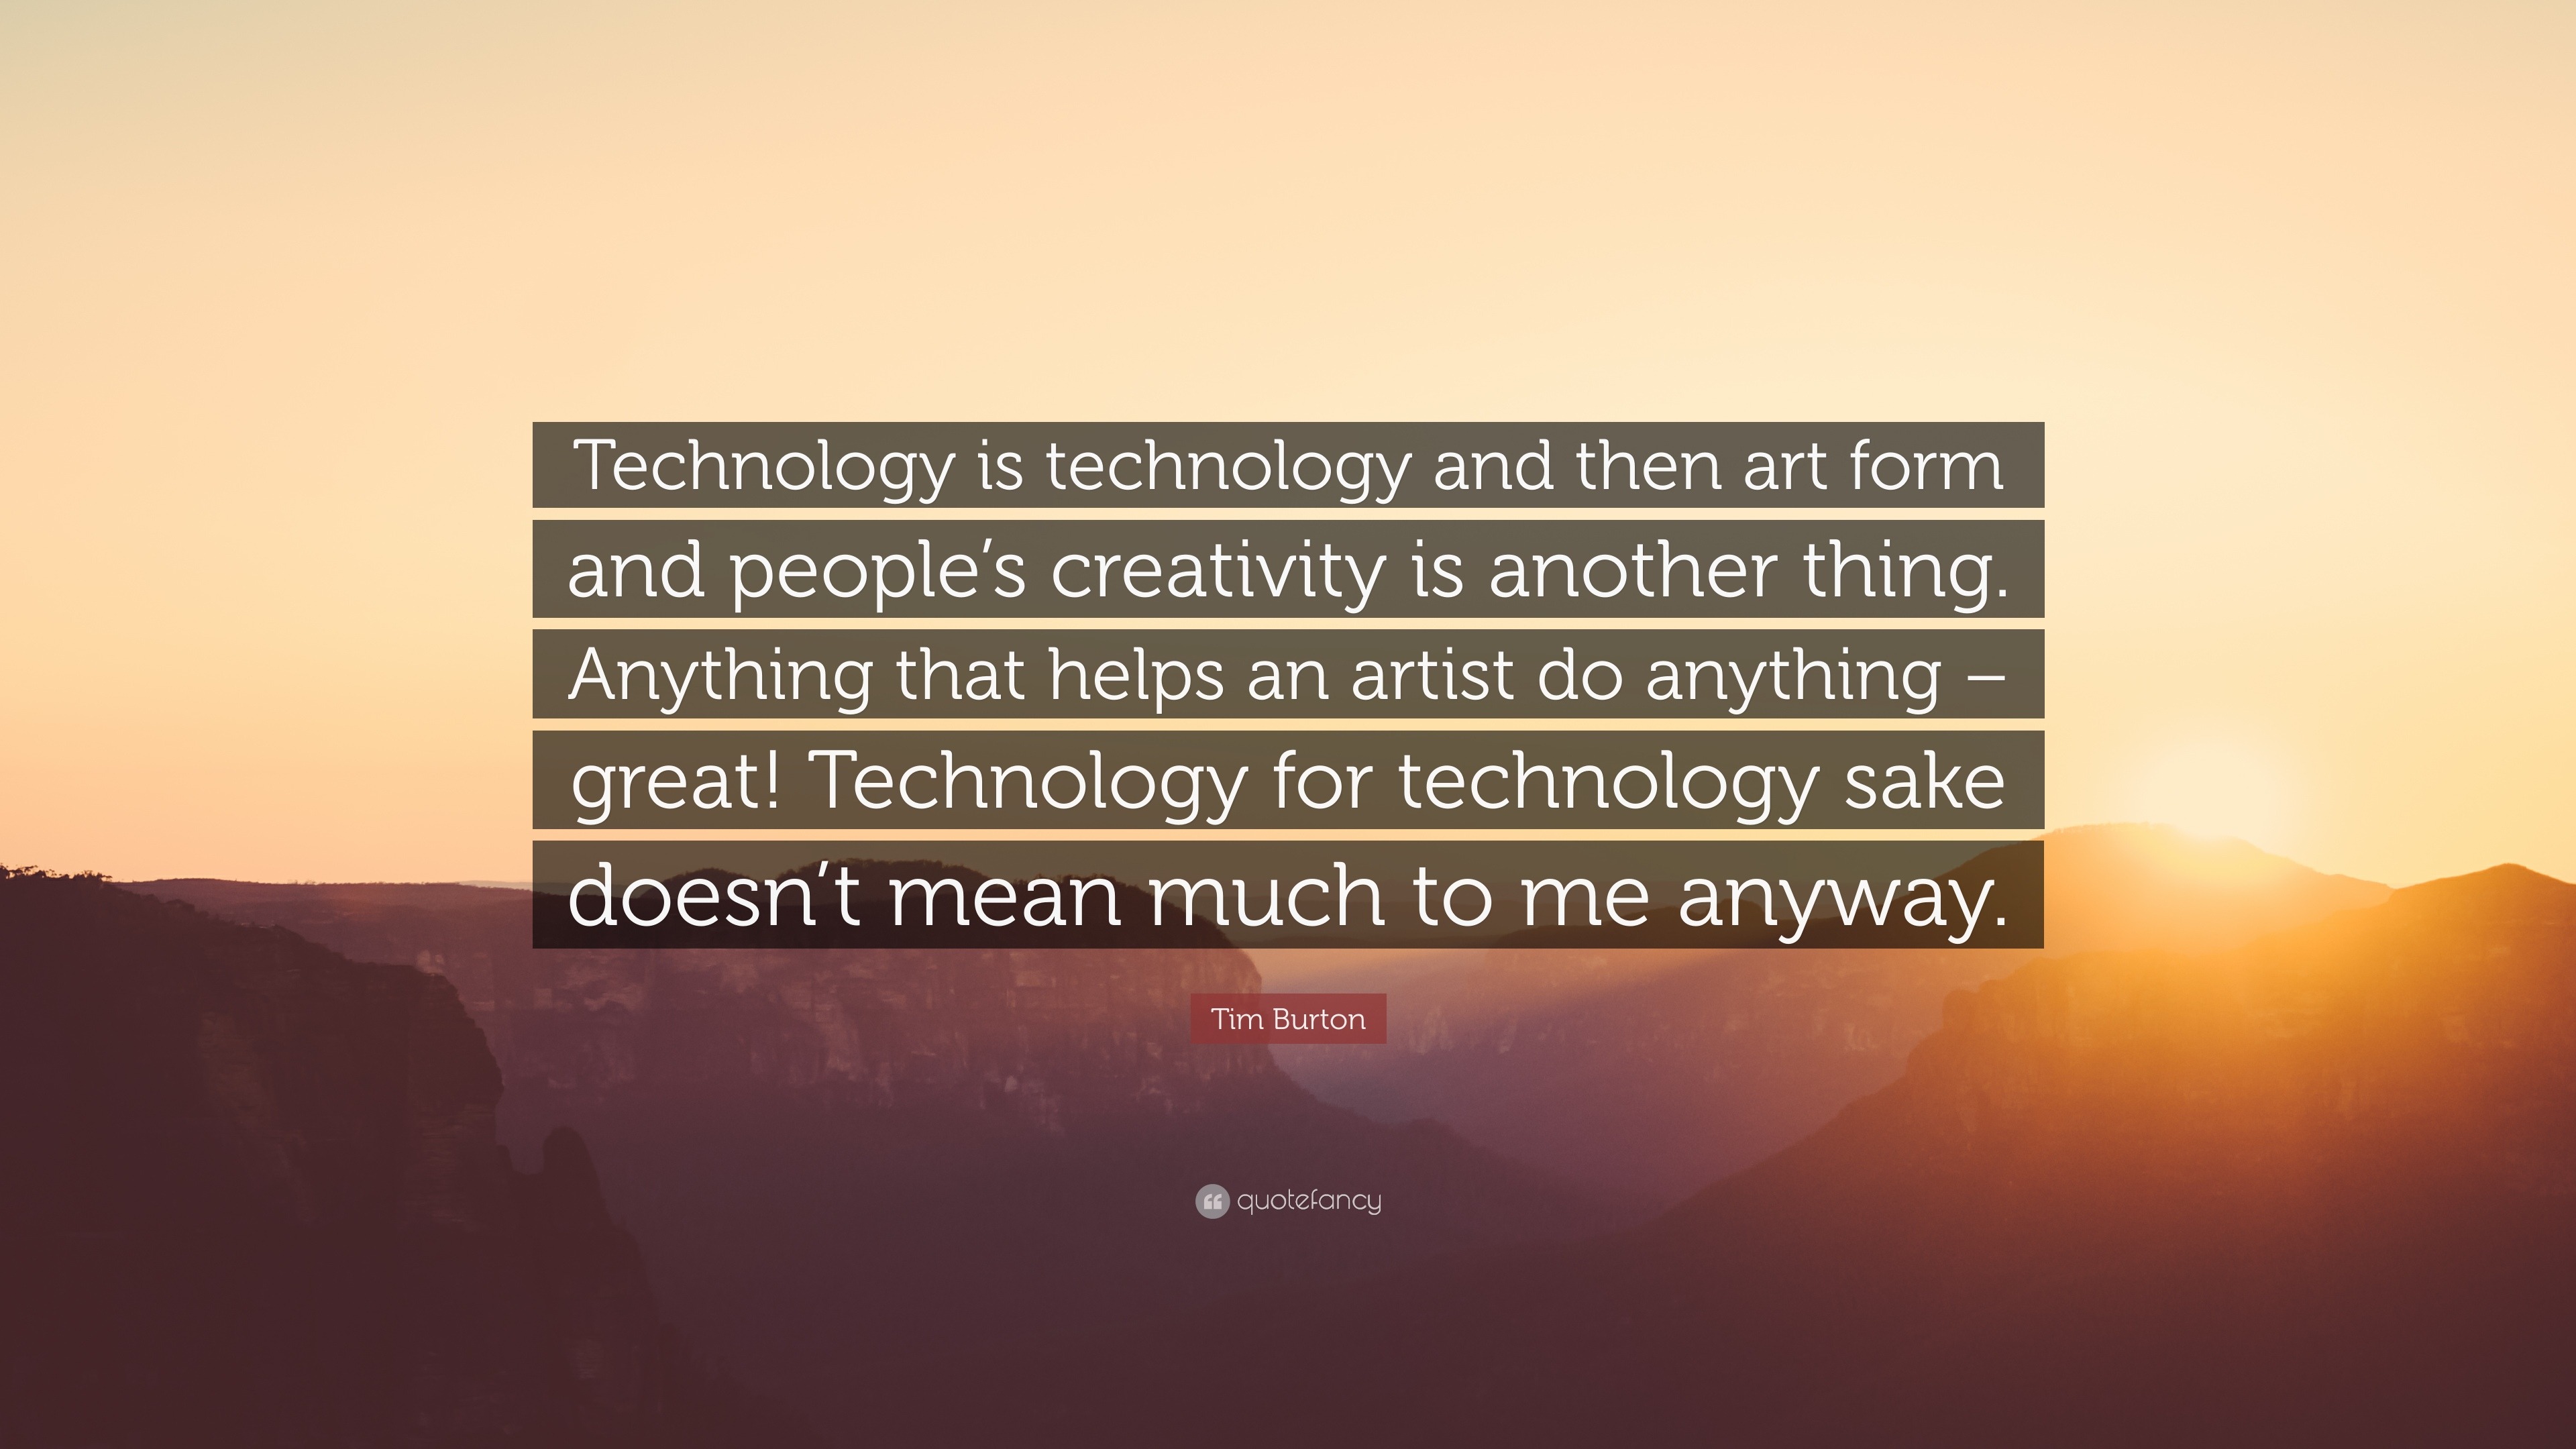 Tim Burton Quote: “Technology is technology and then art form and ...